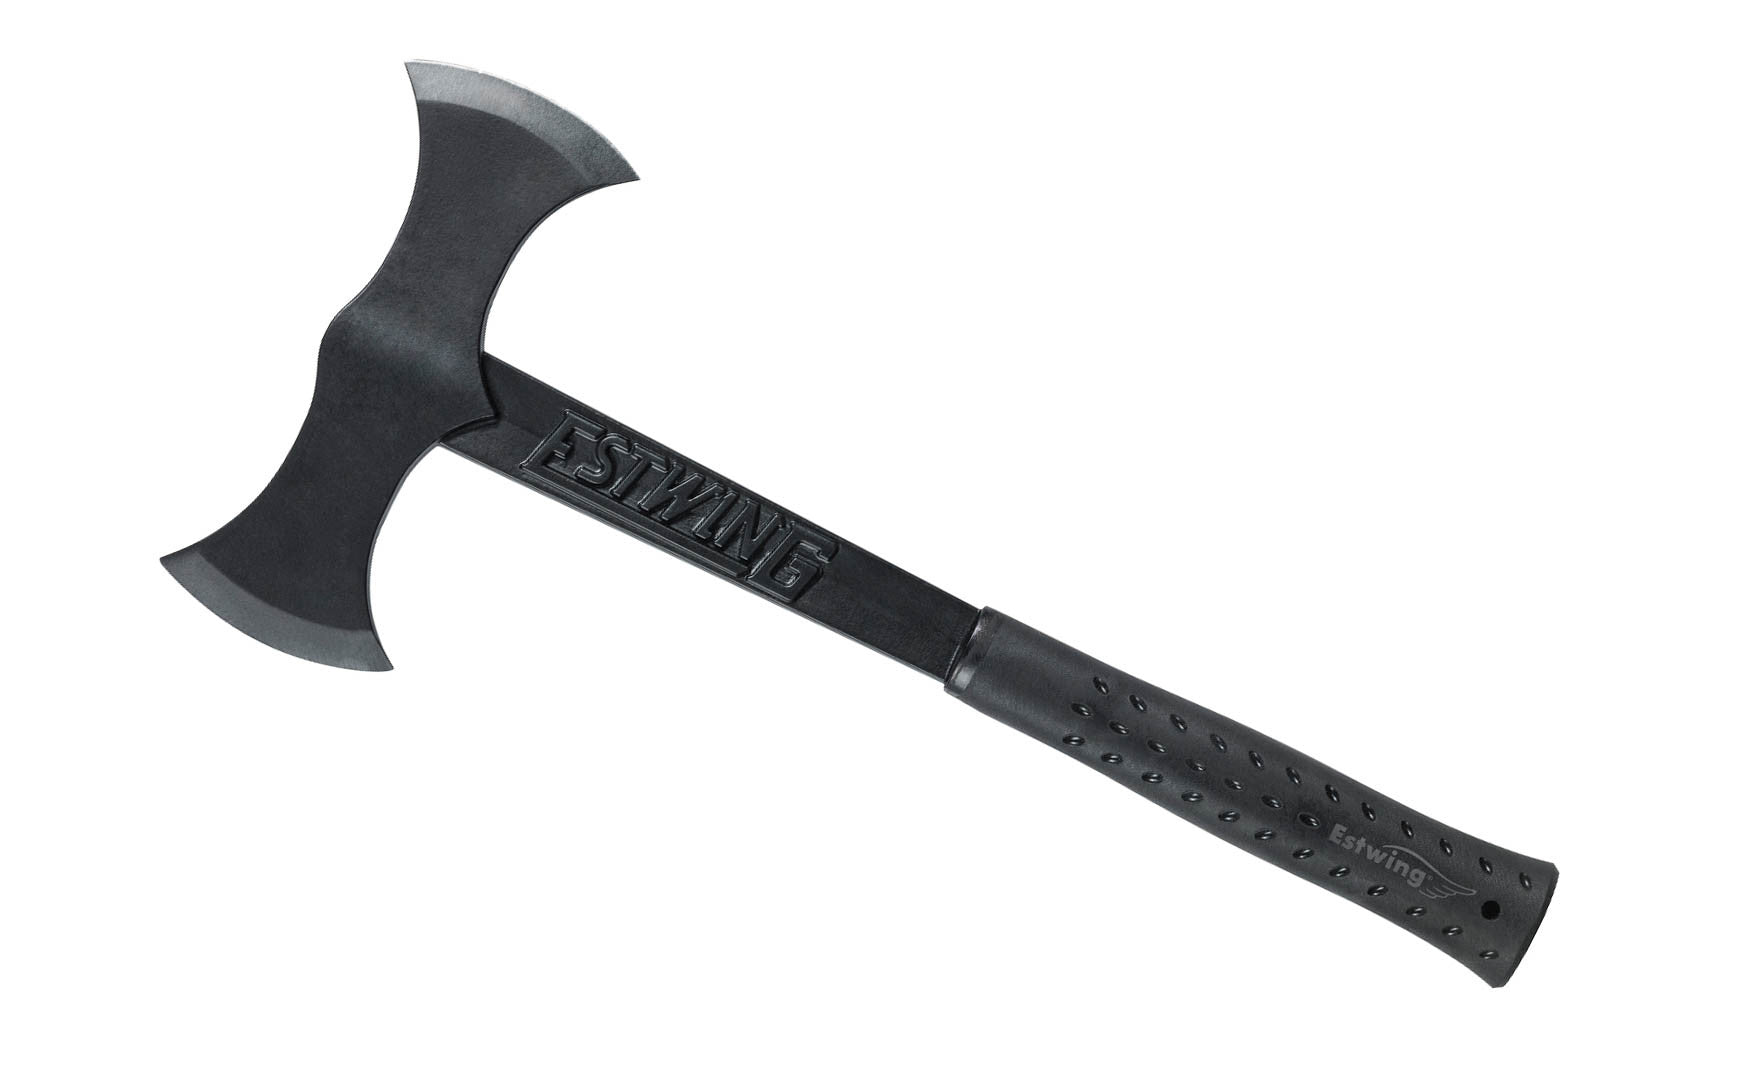 Estwing Black Eagle Double Bit Axe ~ Made in the USA